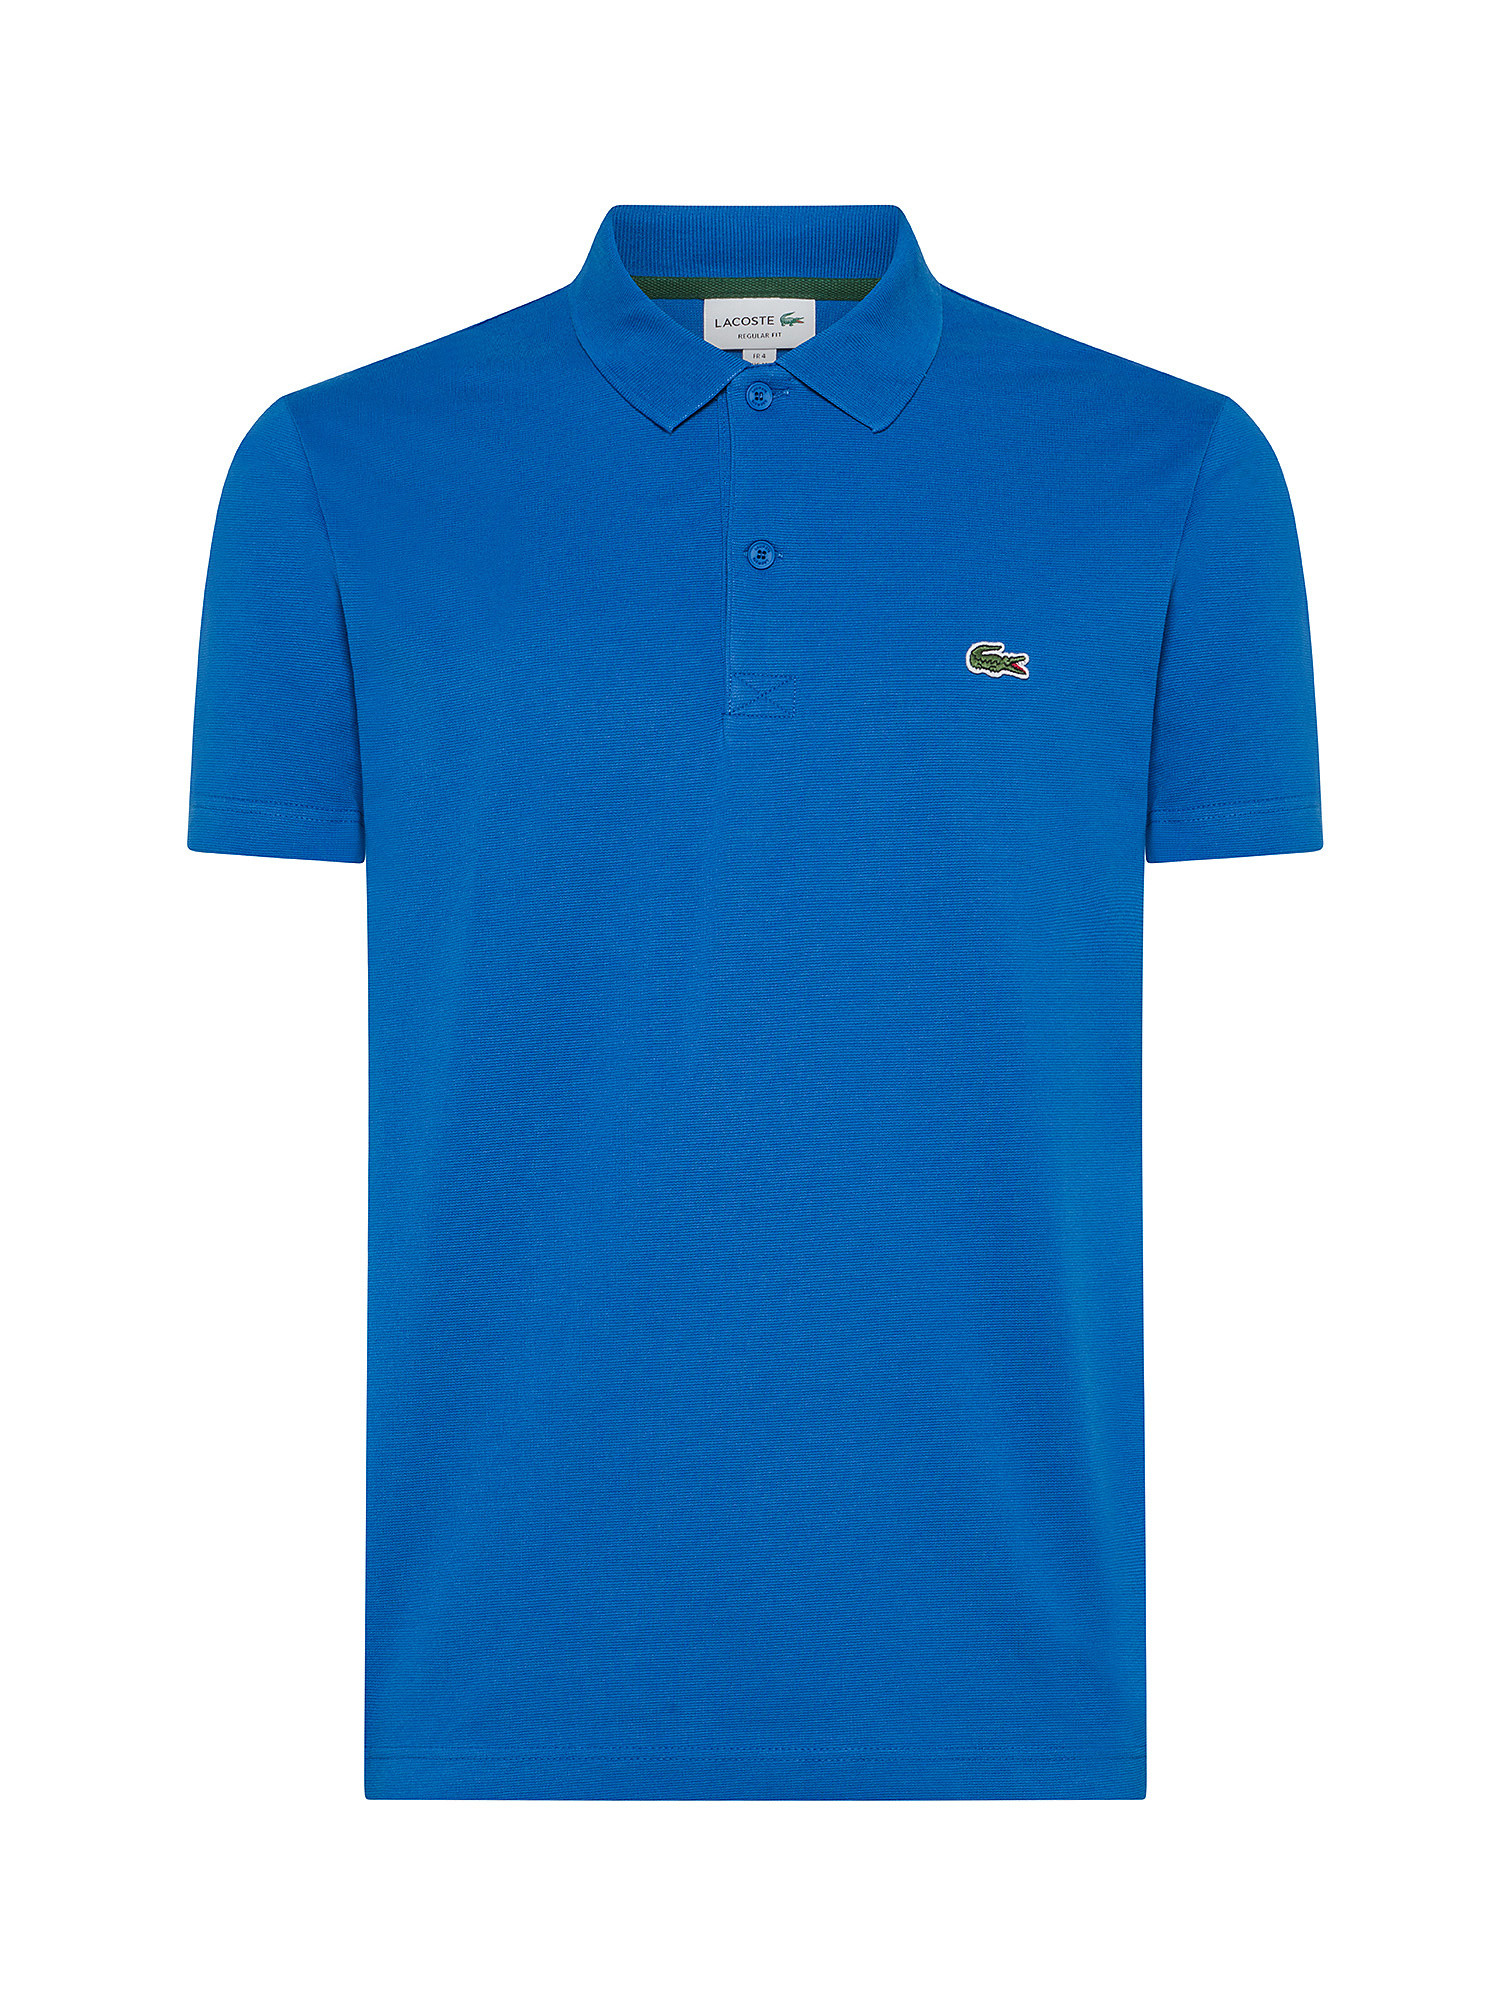 Lacoste - Regular fit stretch polo, Blue, large image number 0